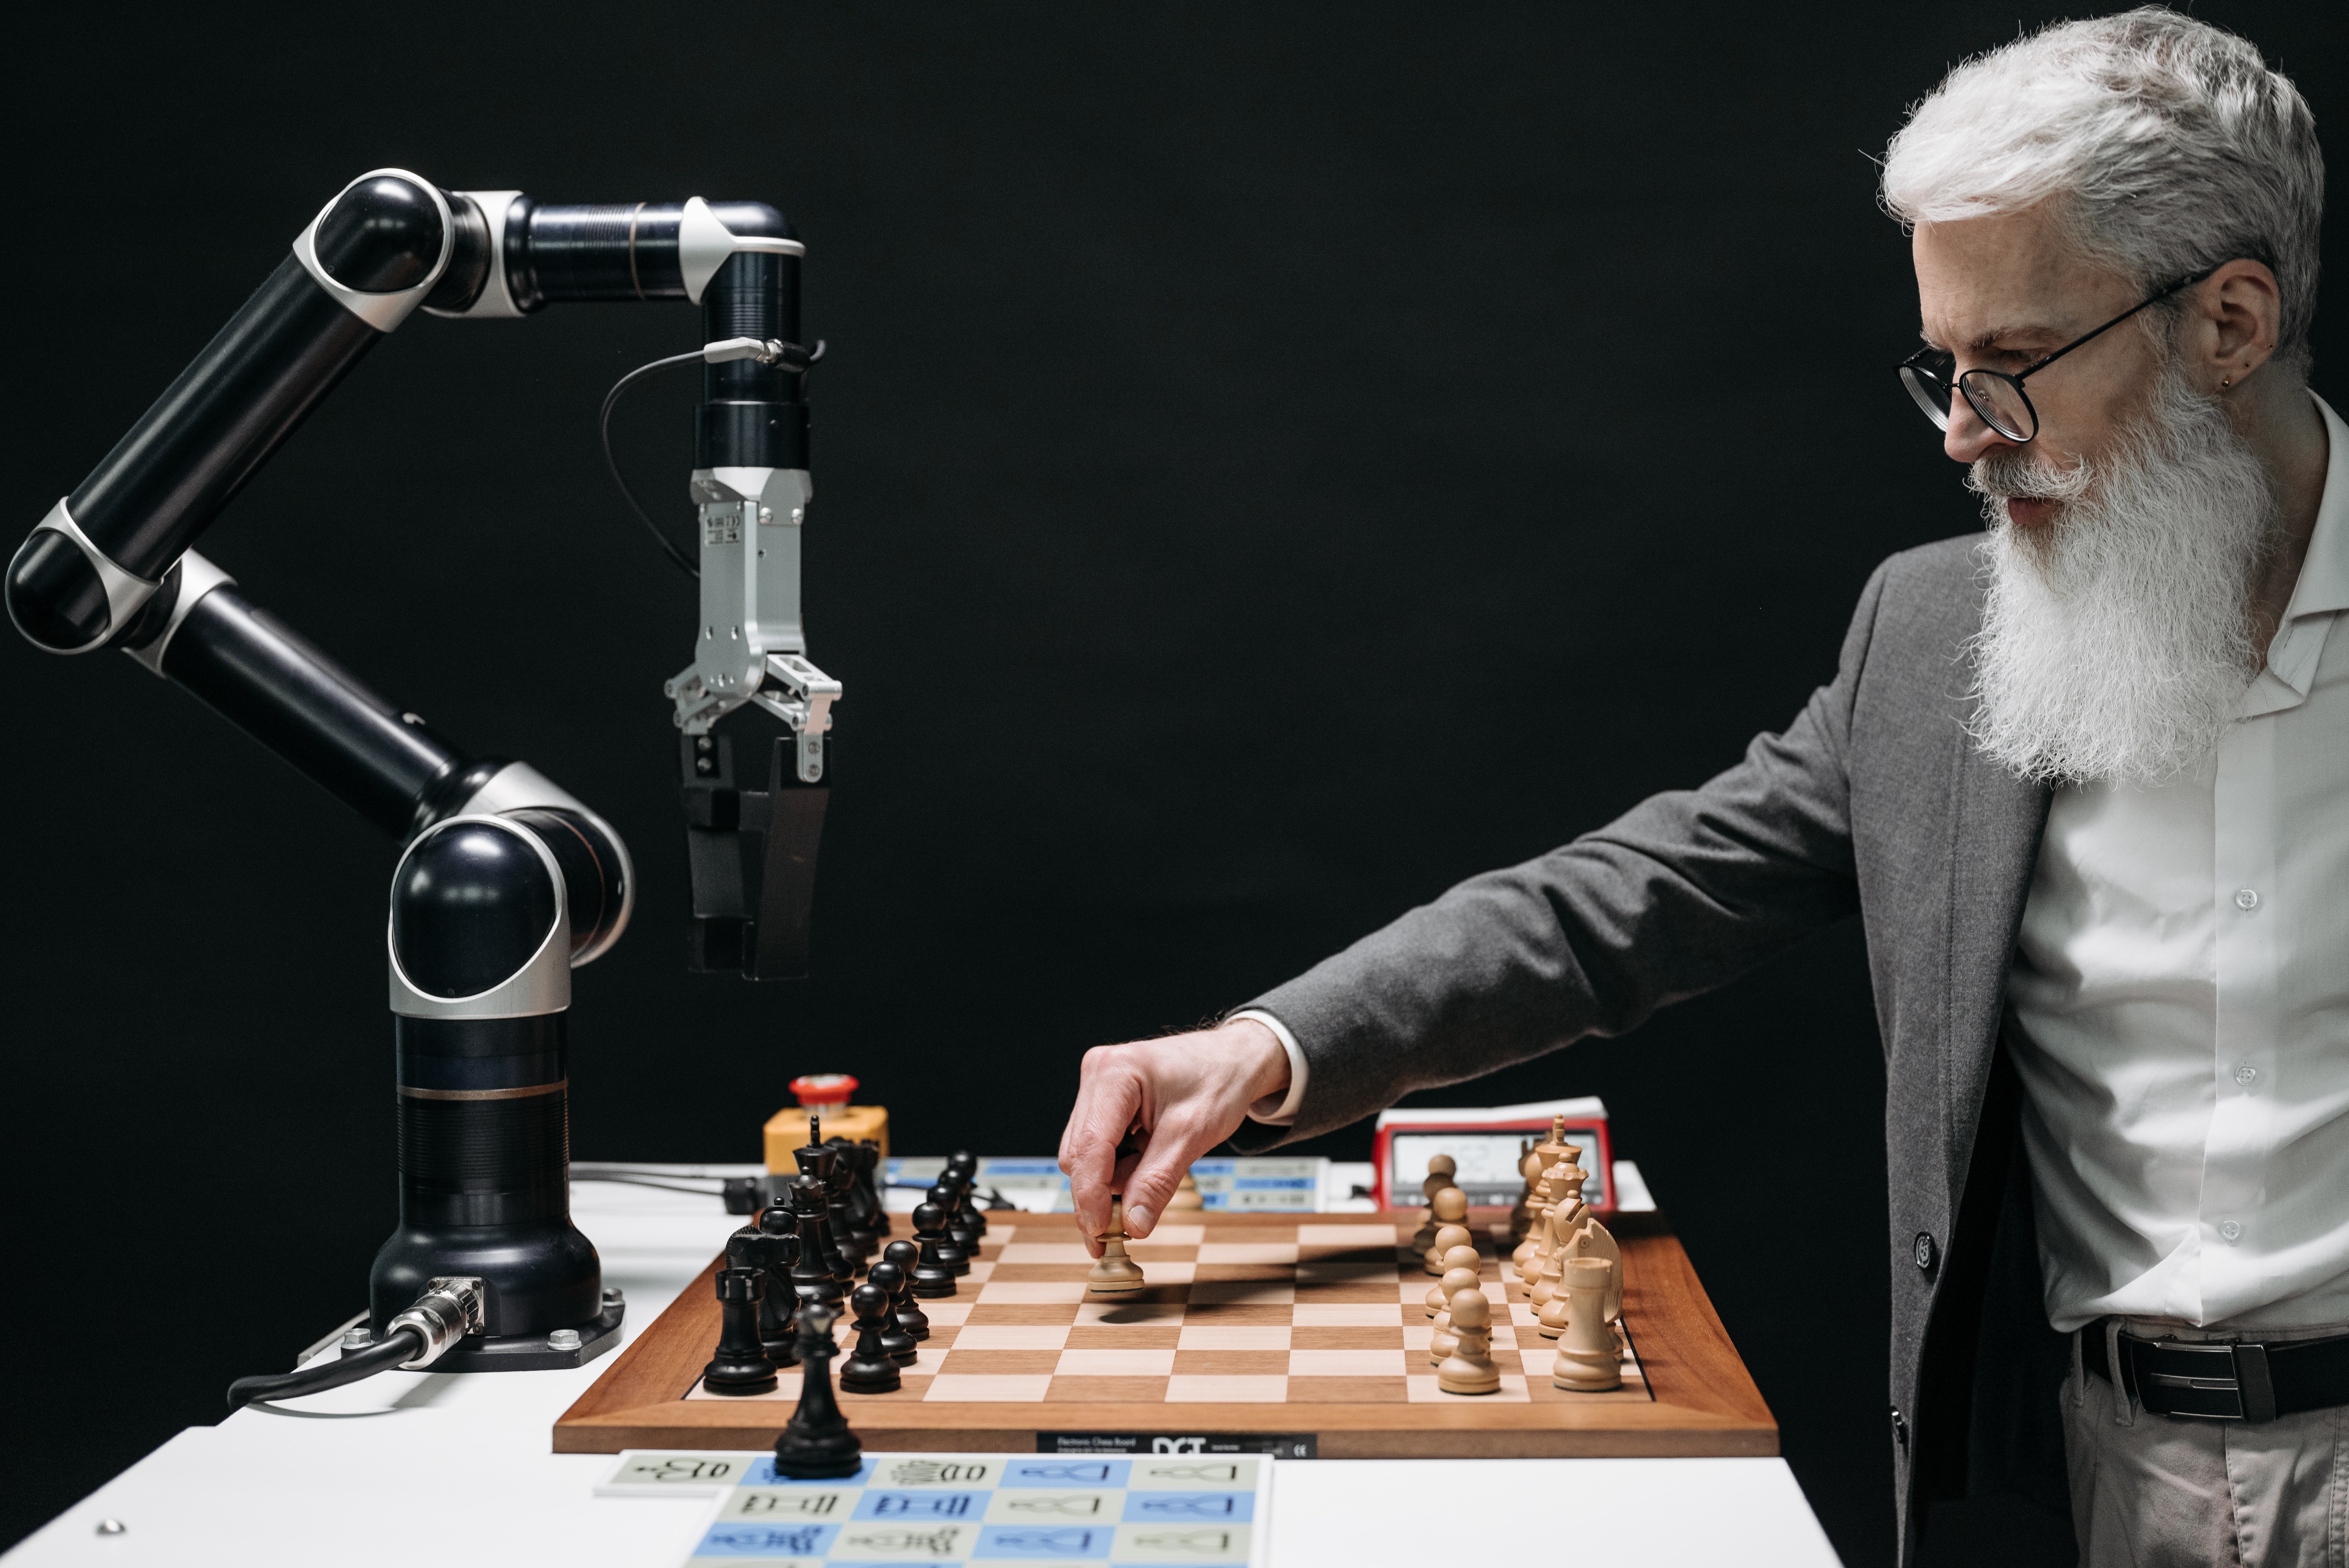 older philosopher looking man playing chess against AI robot